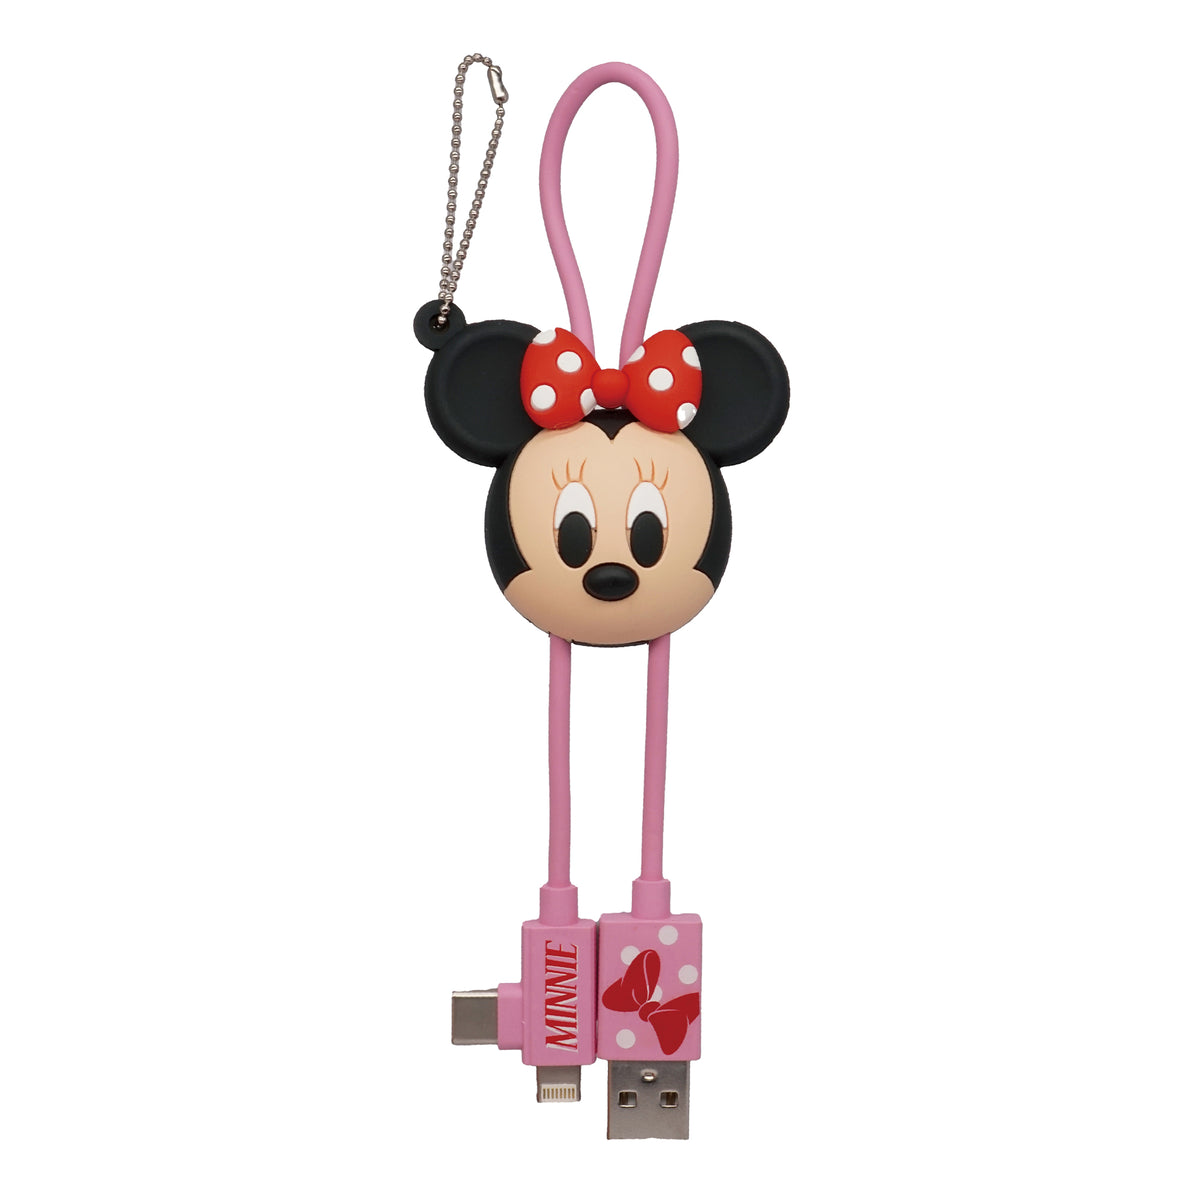 Disney Minnie Mouse USB Charging Cable with Type C and Micro USB Attachments